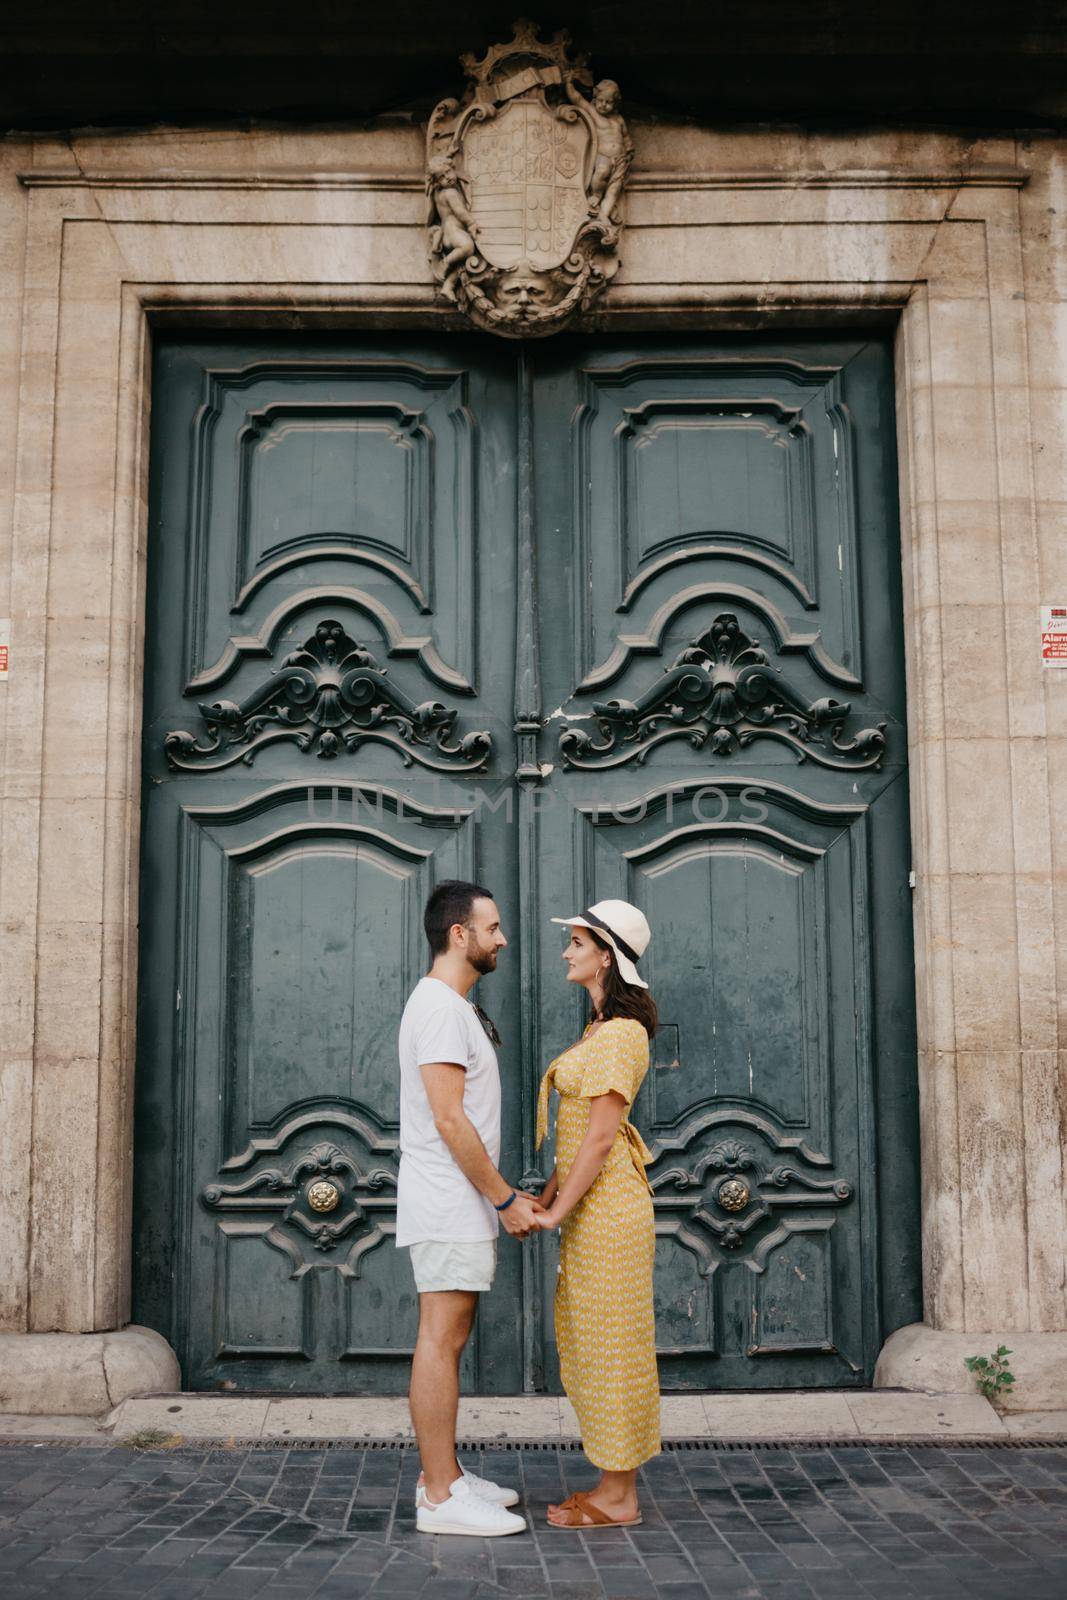 A girl and boyfriend are staying near the giant doors holding each other's hand. by RomanJRoyce